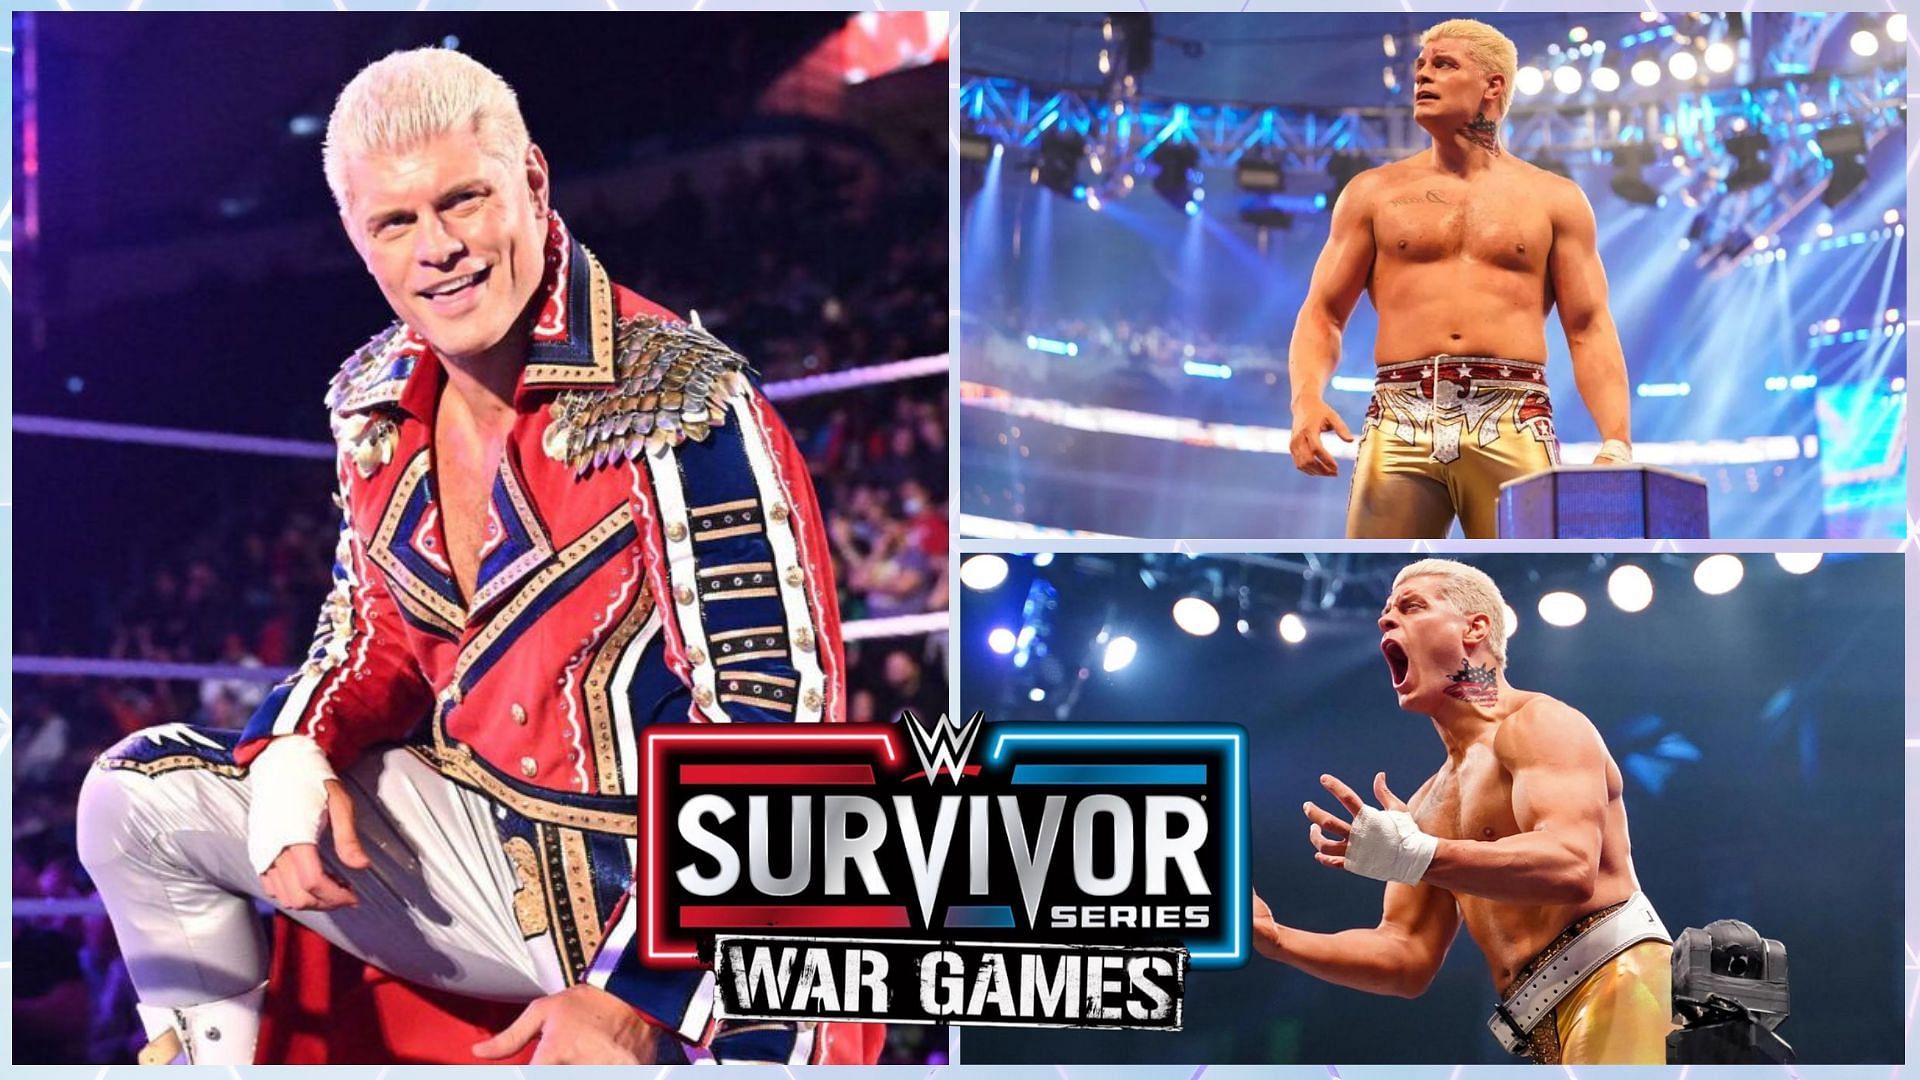 Cody Rhodes spoke highly of his father after Survivor Series WarGames.